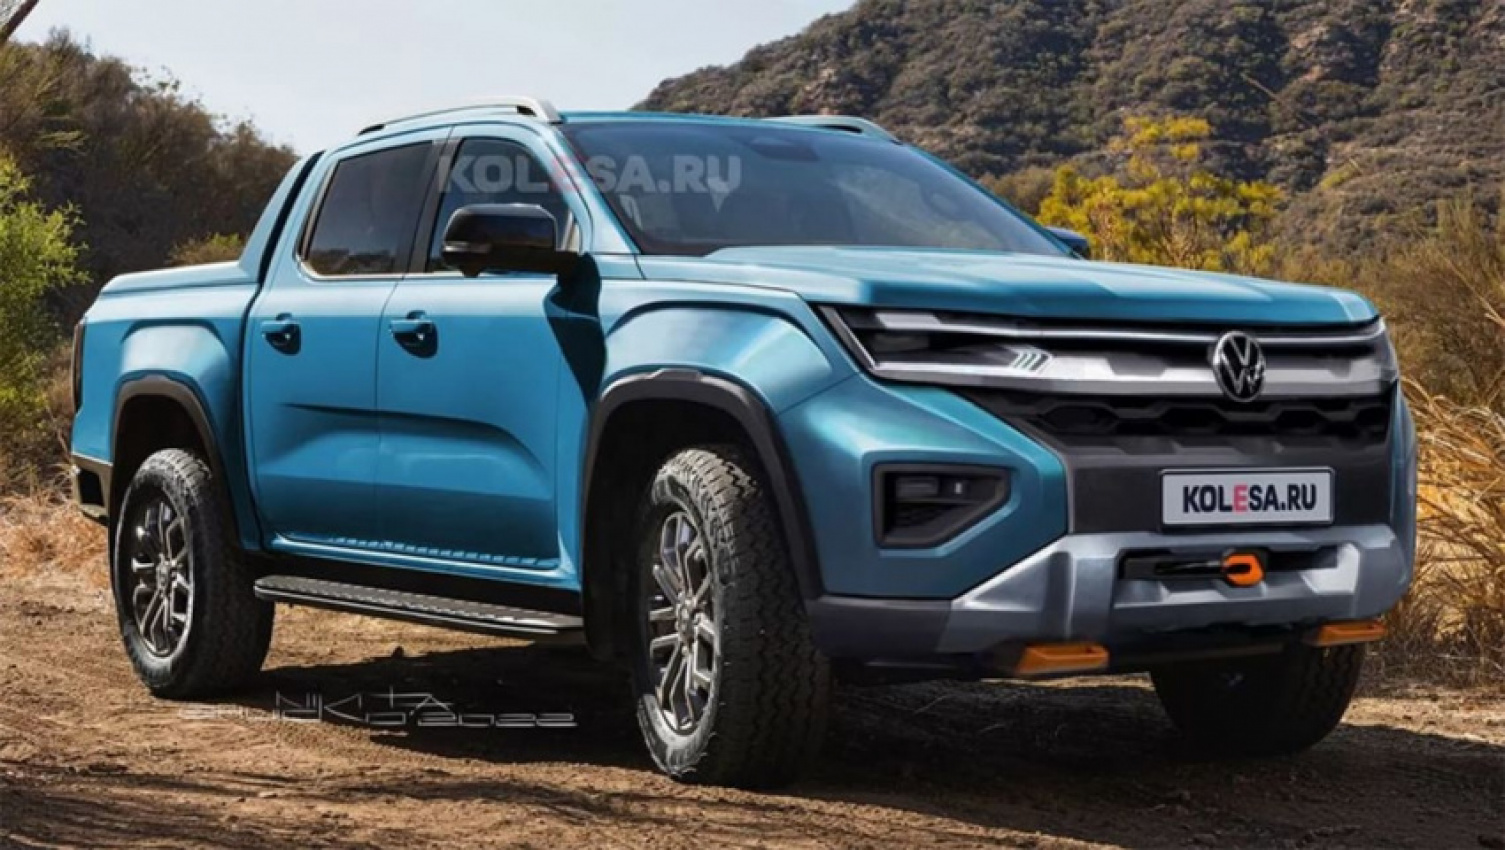 autos, cars, ford, toyota, volkswagen, ford ranger, toyota hilux, volkswagen amarok, volkswagen amarok 2022, volkswagen news, volkswagen ute range, 2023 volkswagen amarok muscles-up ahead of launch! turbo-diesel v6 and unique design elements coming for 2022 ford ranger twin and new toyota hilux rival